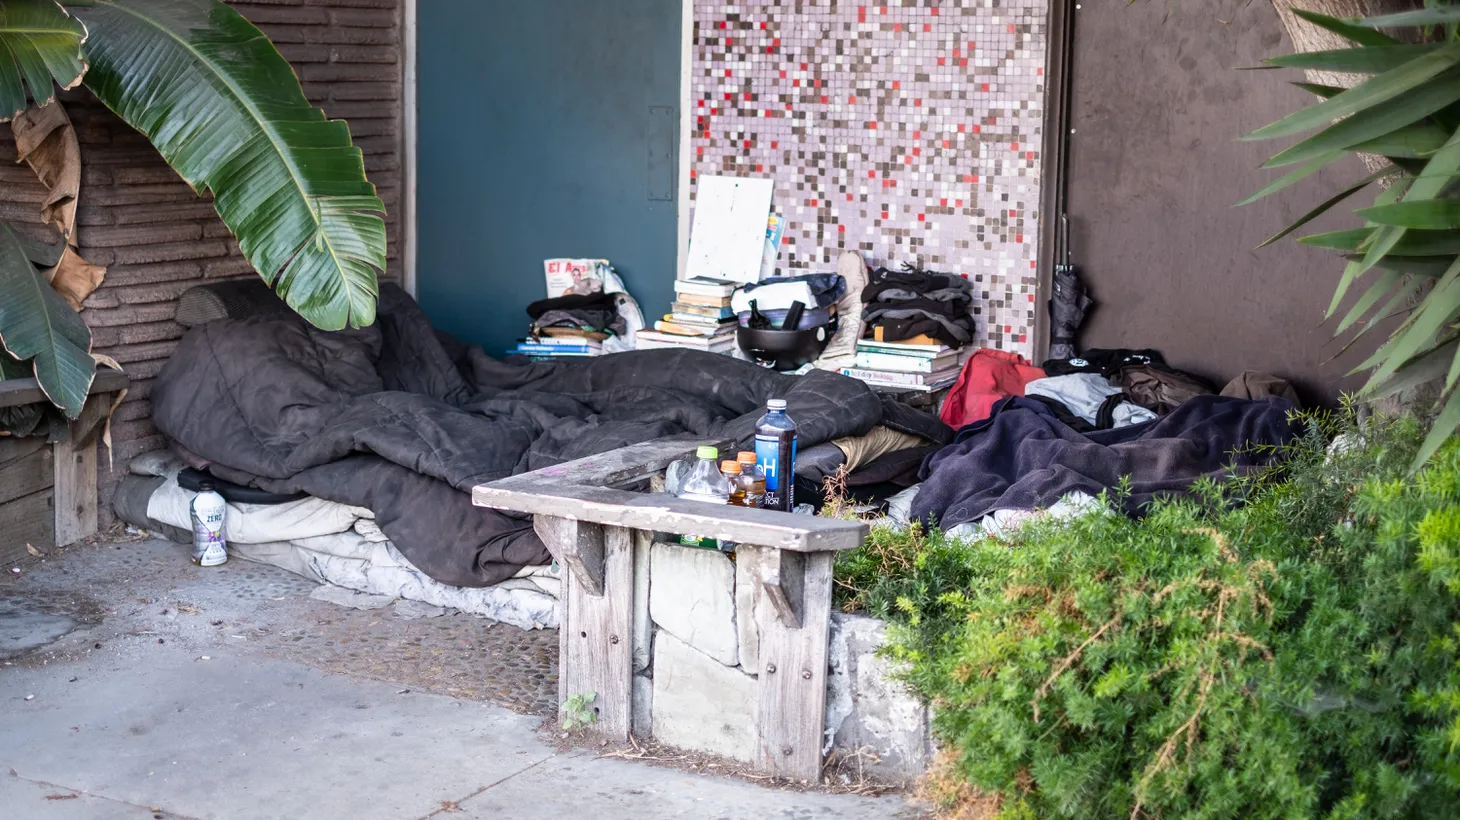 A unhoused person’s possessions are seen on Venice Blvd. in Culver City, CA. Governor Gavin Newsom says his “CARE Court” plan would help certain people get off the streets and obtain the mental health care they need.